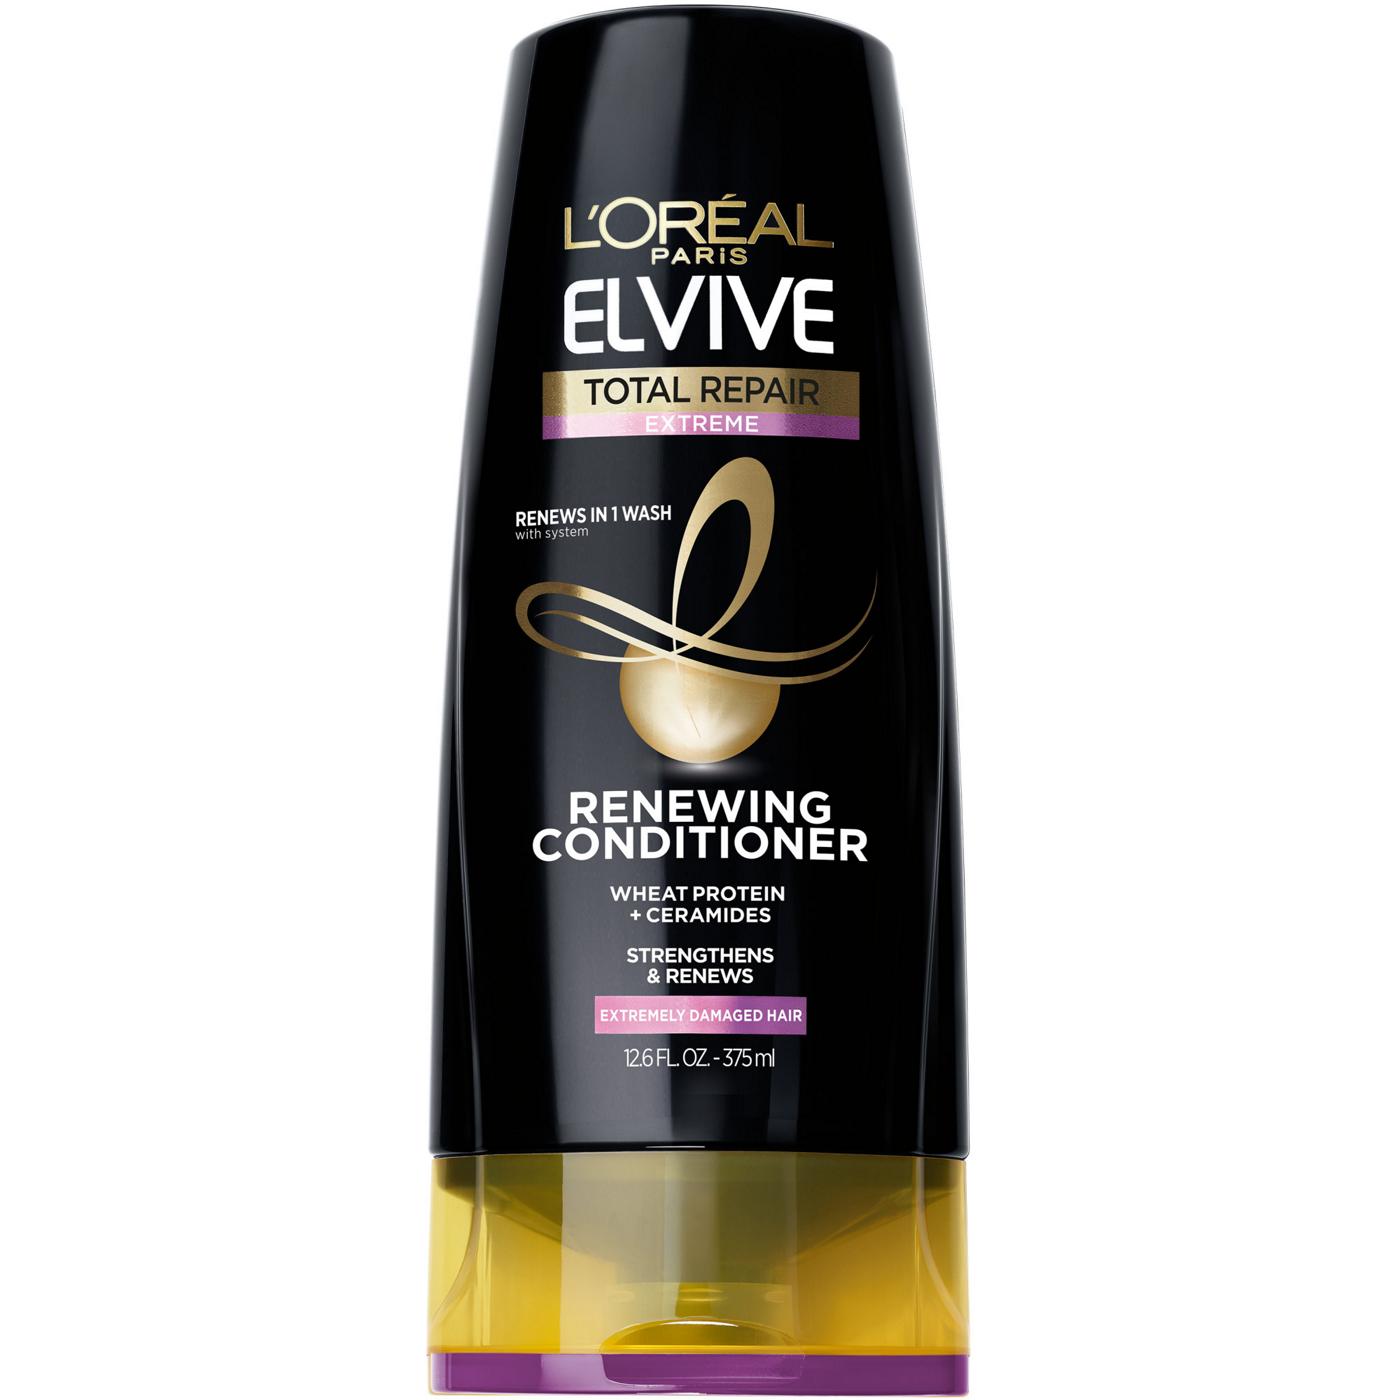 L'Oréal Paris Elvive Total Repair Extreme Renewing Conditioner for Damaged Hair; image 1 of 5